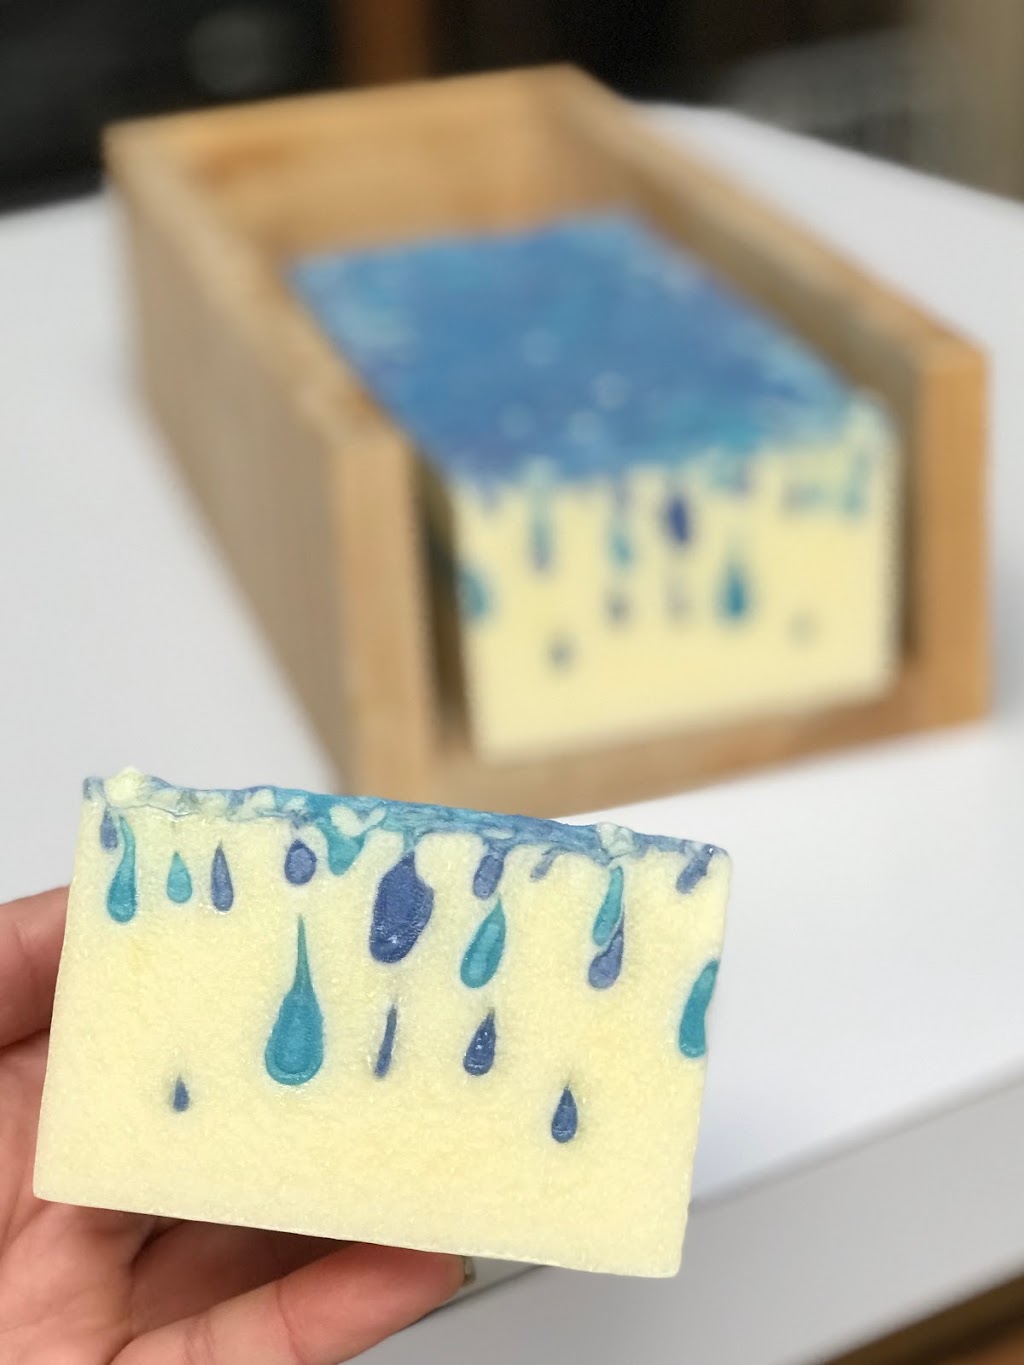 Little Soap Lady | 69 Forest Rd, Kings Park, NY 11754 | Phone: (631) 521-3980